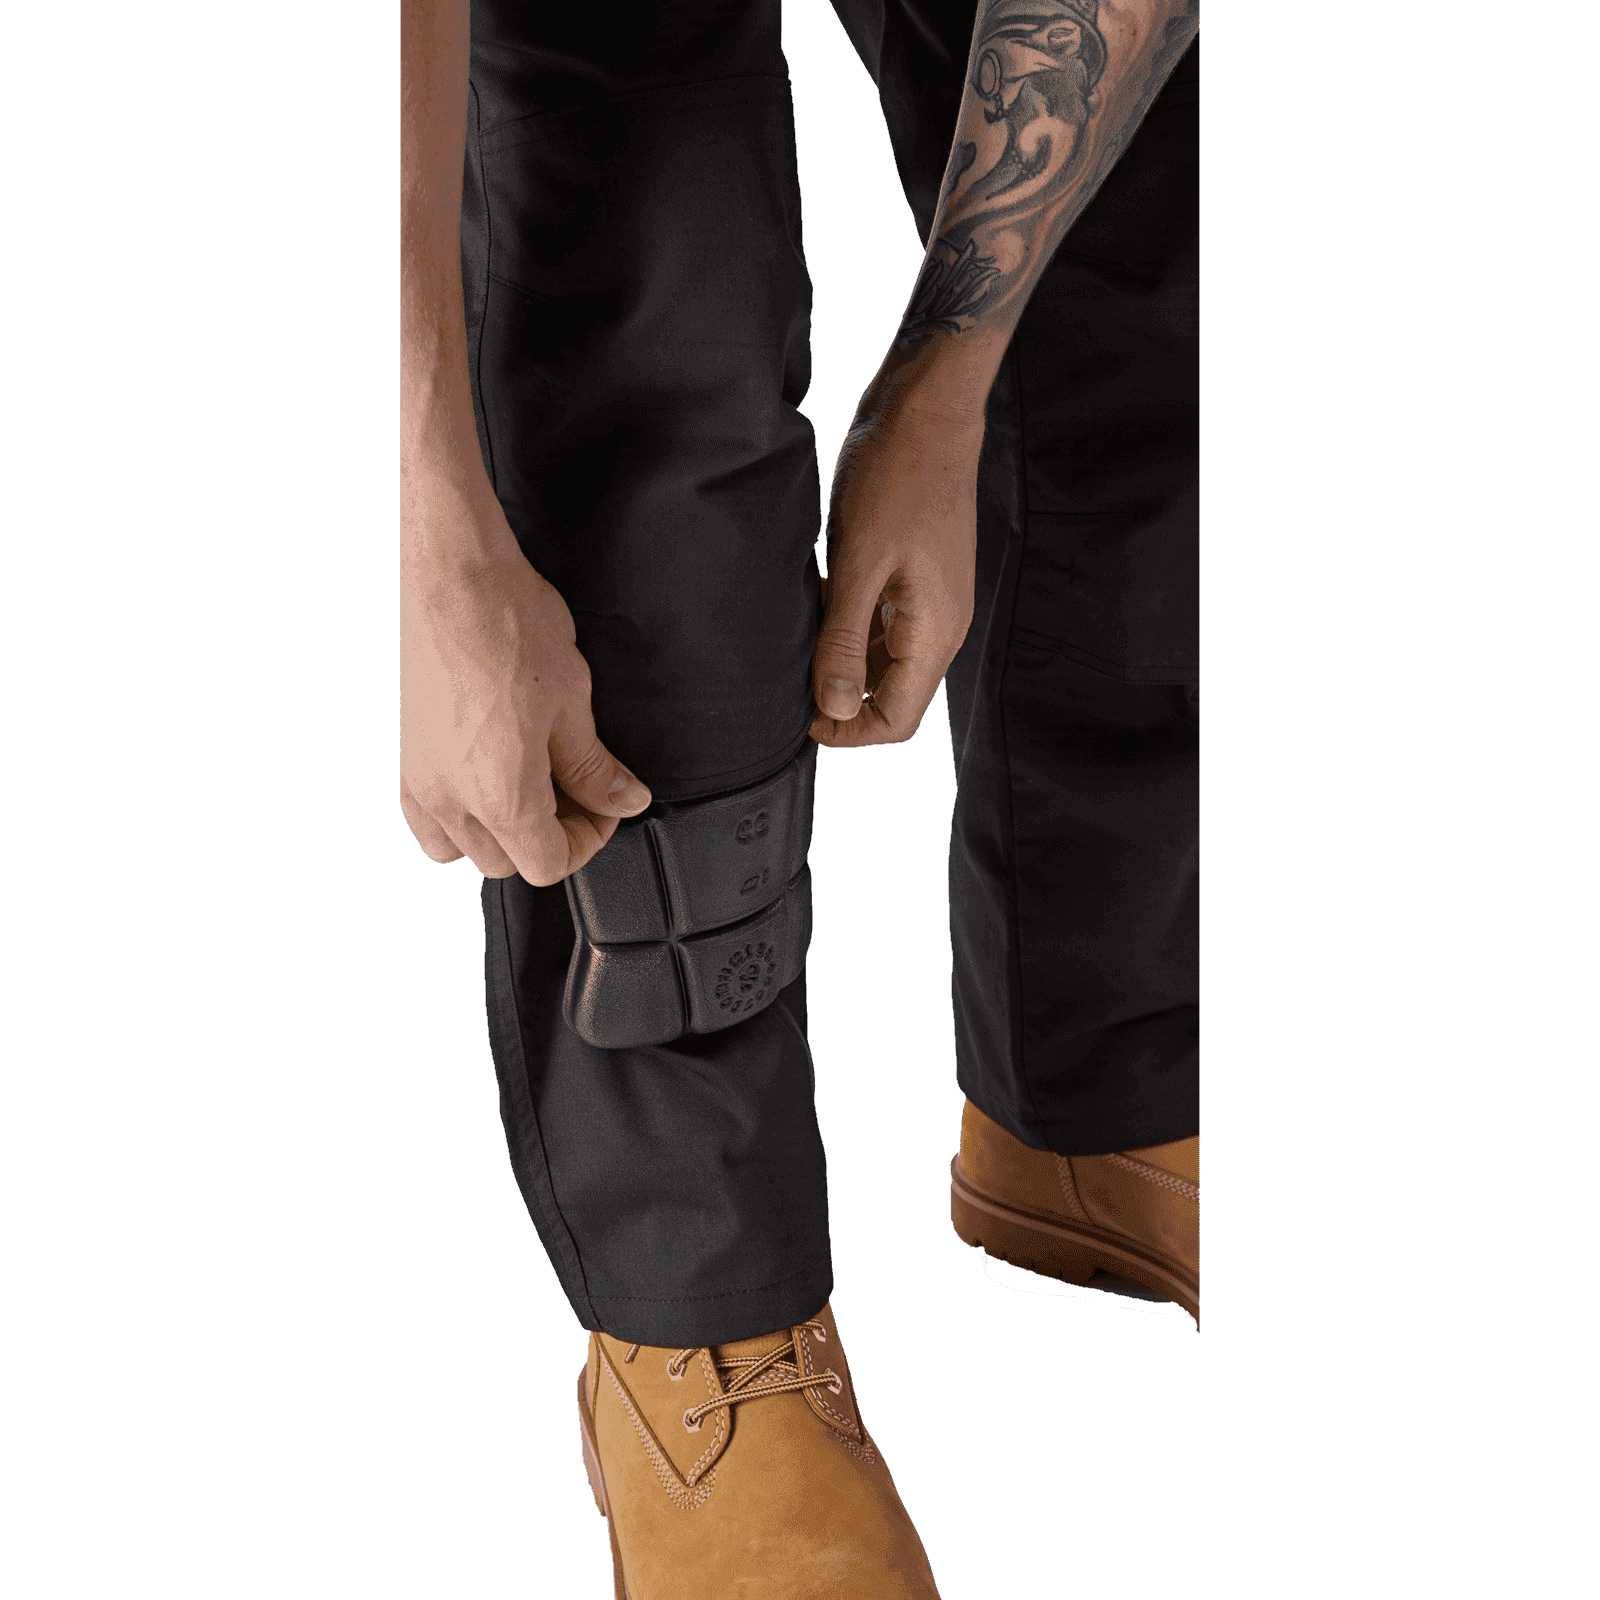 Action Flex Work Trousers Dickies